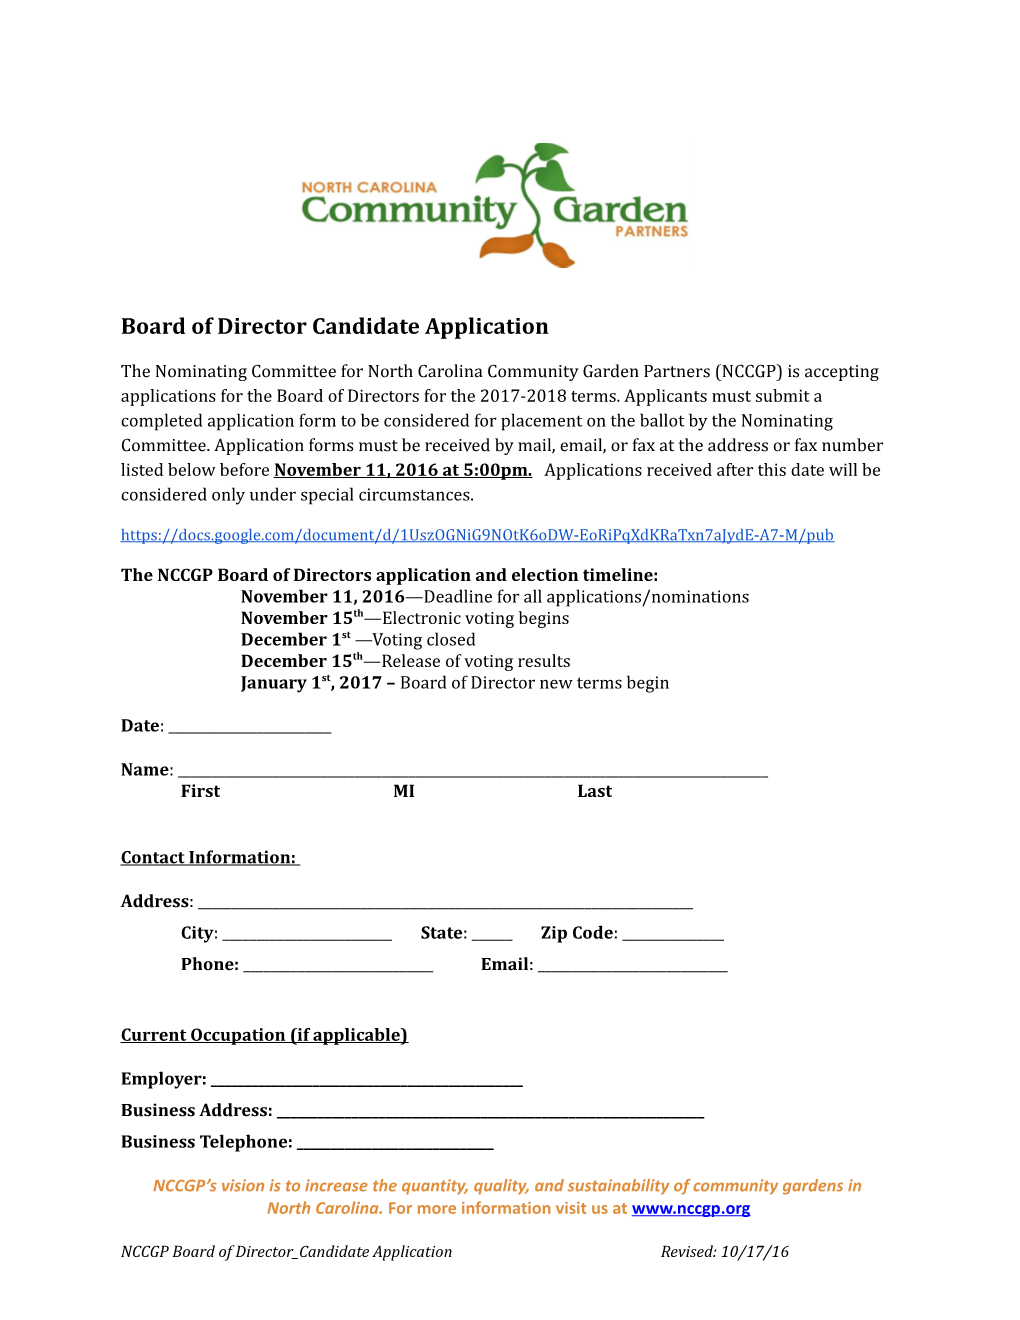 Board of Director Candidate Application